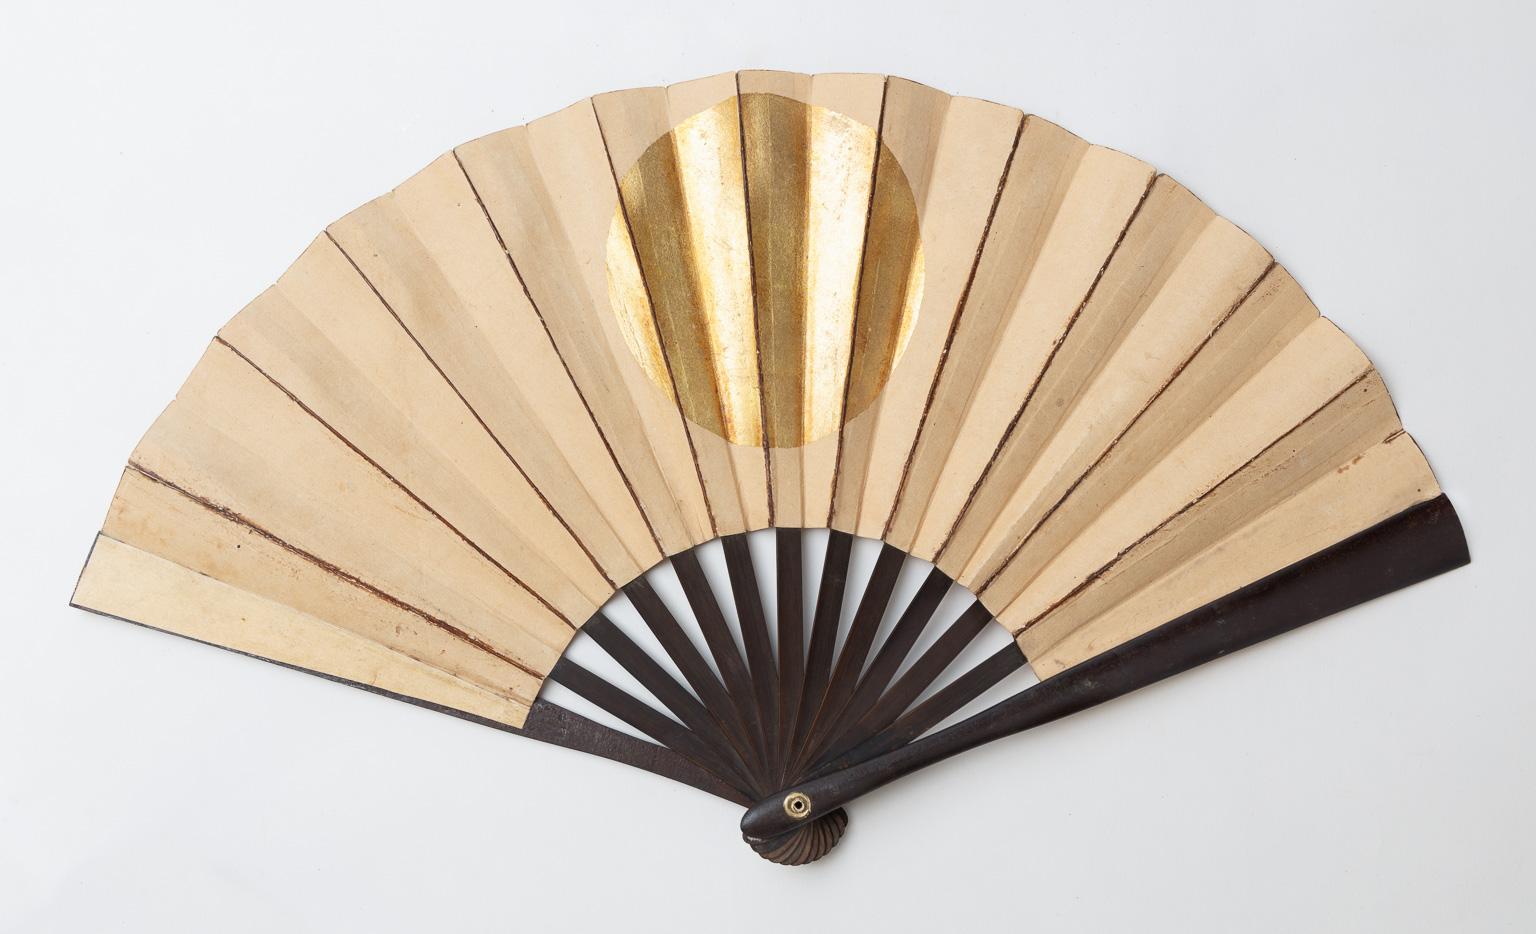 Iron, paper with pigments and bamboo.
Menhari-gata (opening fan), sensu-gata (enlongated shape)
Lenght: 31.2

Iron fan with an elegant shape, with eleven bamboo ribs.

Customarily carried in the hands or tucked in the obi (belt), the folding